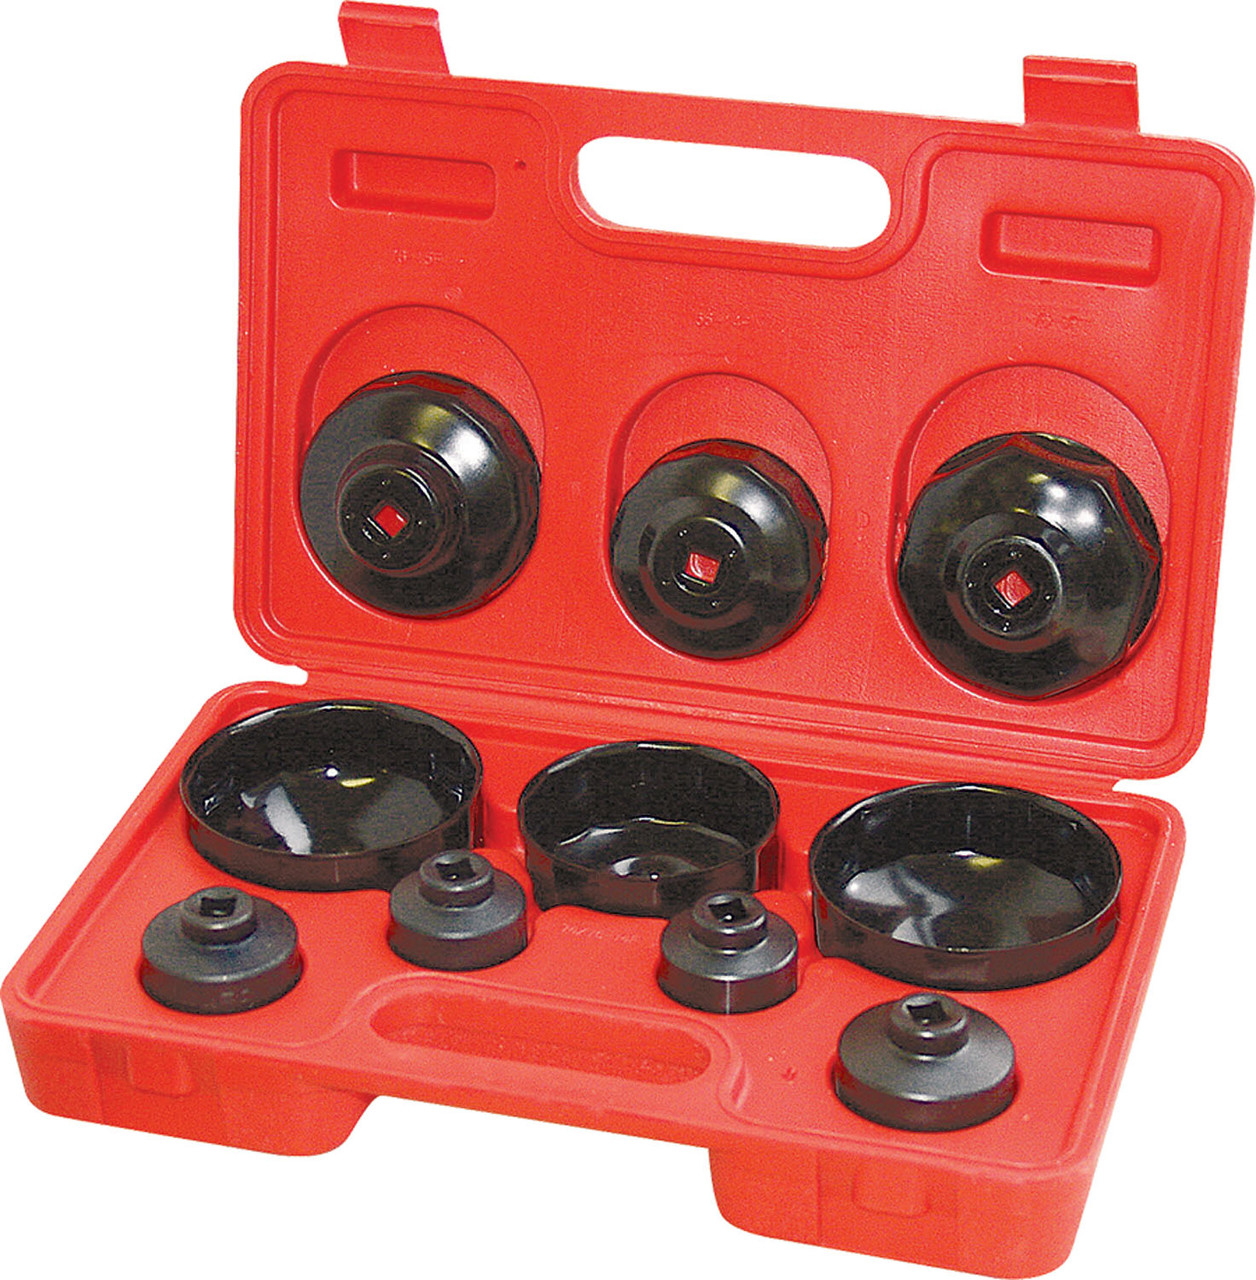 10 Piece Cup Type Oil Filter Wrench Set